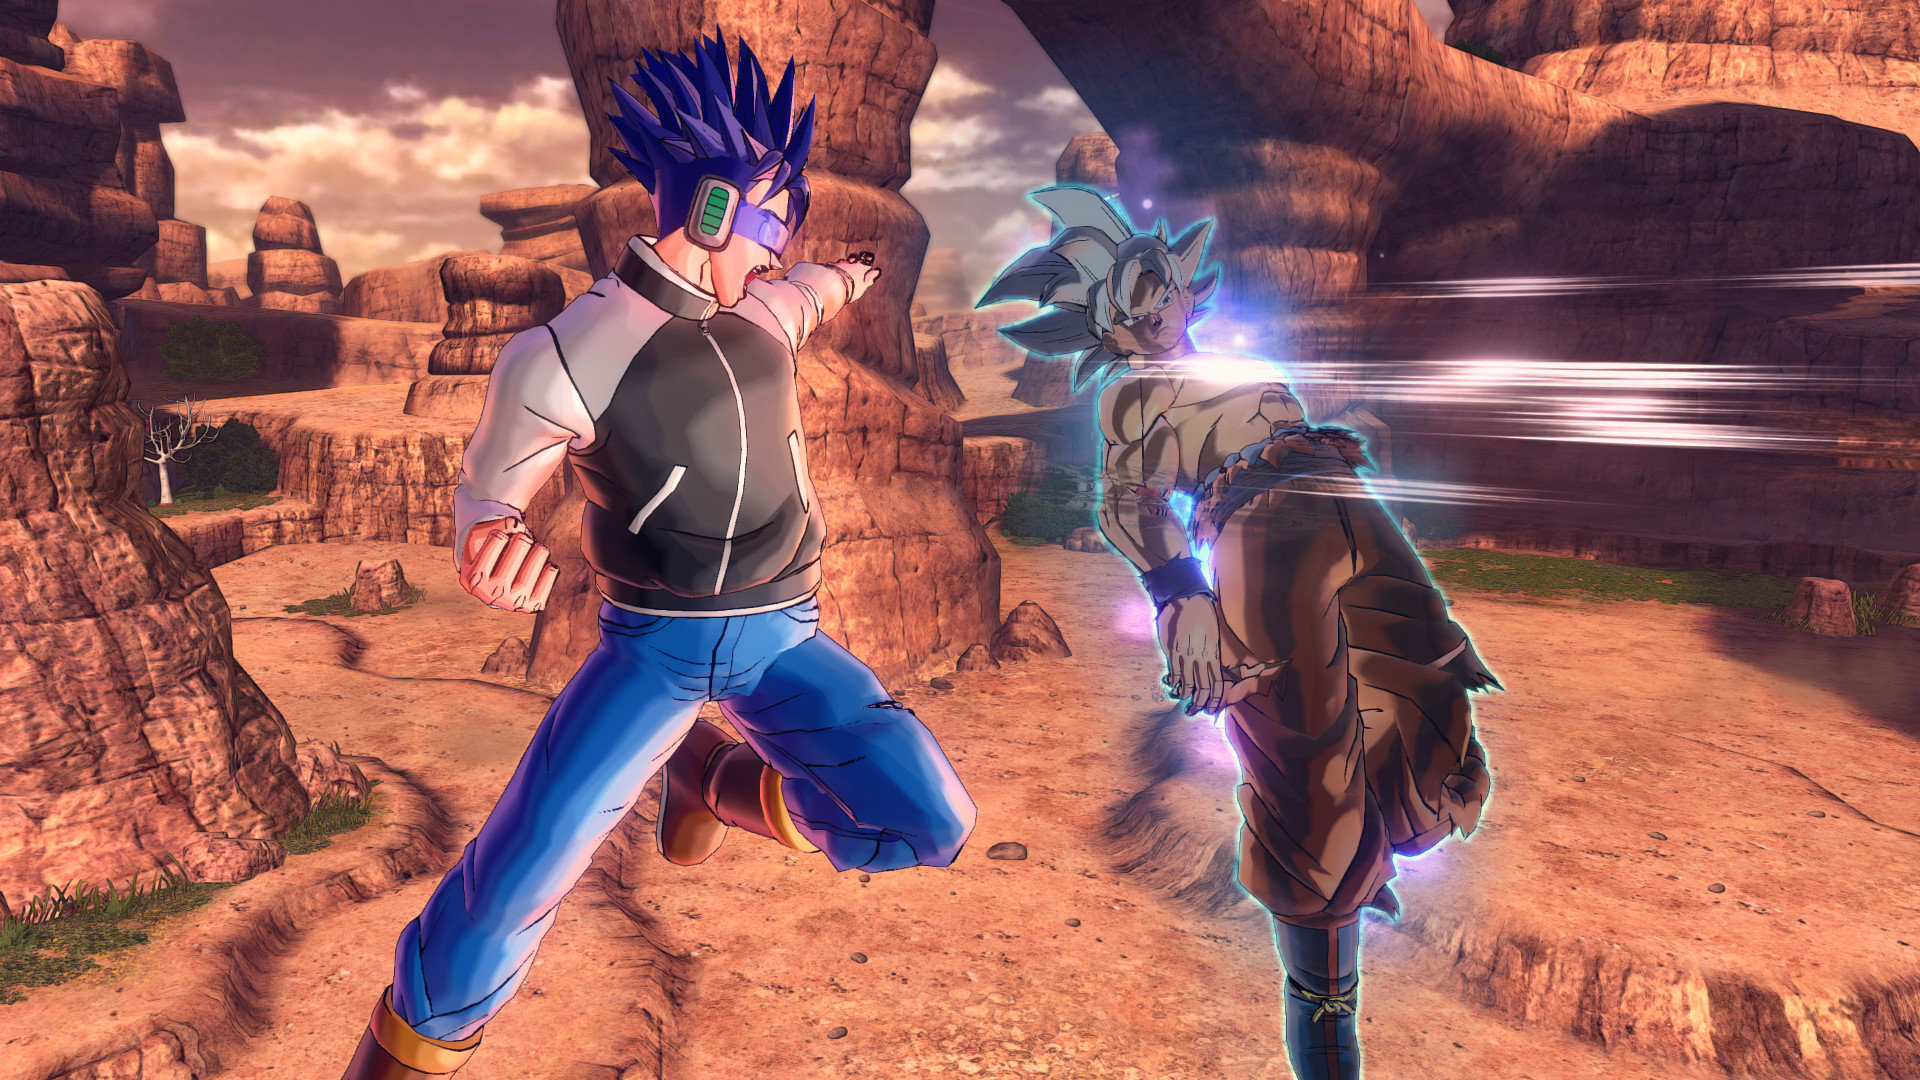 DRAGON BALL XENOVERSE 2 - Extra DLC Pack 2 on Steam